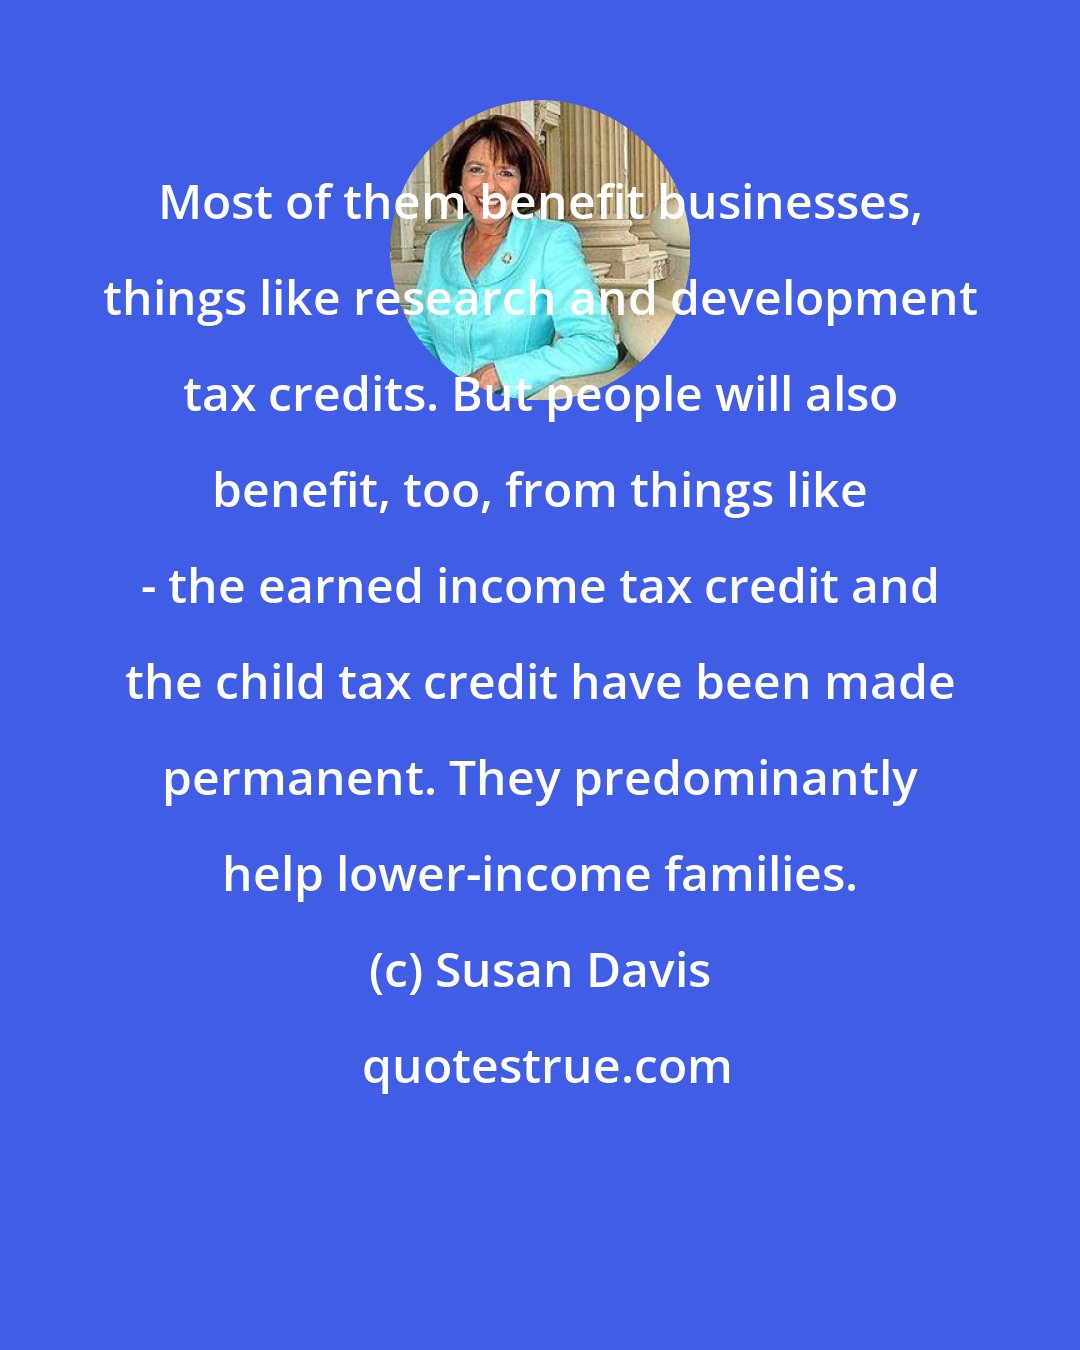 Susan Davis: Most of them benefit businesses, things like research and development tax credits. But people will also benefit, too, from things like - the earned income tax credit and the child tax credit have been made permanent. They predominantly help lower-income families.